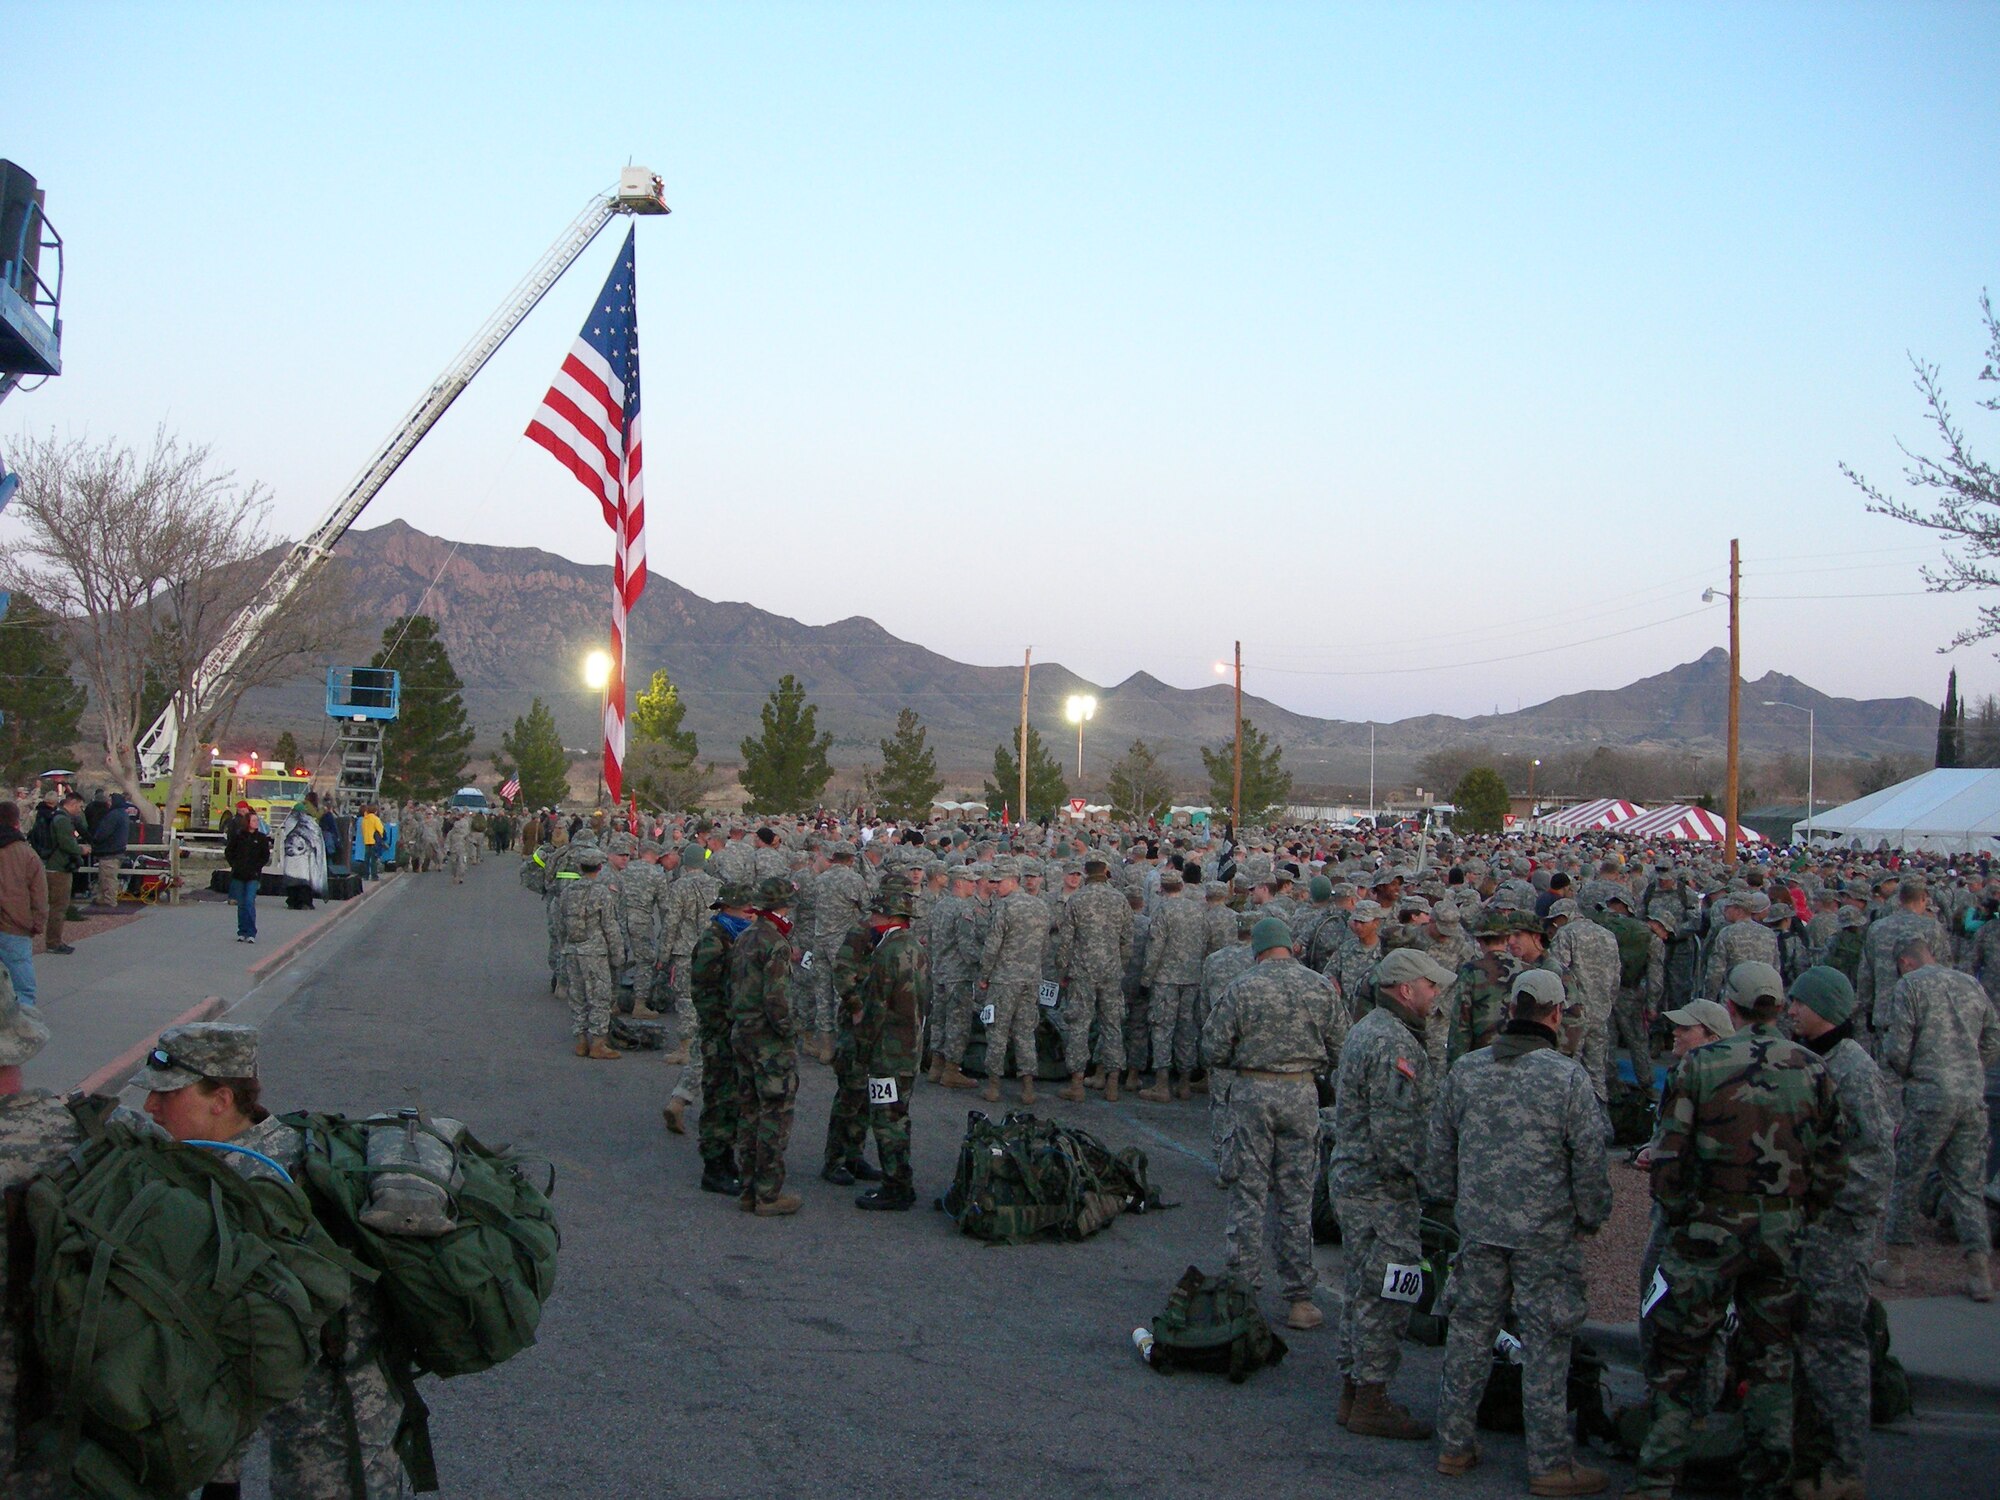 More than 5,700 participants stand by to begin the opening ceremonies at the Bataan Memorial Death March at White Sands Missile Range, N.M., March 21. The event included 22 survivors of the Bataan Death March in 1942. "One of the survivors sounded off during role call and it was so strong it sounded as if he was 20 years old again," said Jerry Haupt, 56th Security Forces Squadron standardized evaluations superintendant and retired SFS master sergeant. "The strength he still has blows my mind and that's why he was able to get through what he did." (U.S. Air Force photo courtesy 56th Security Forces Squadron)